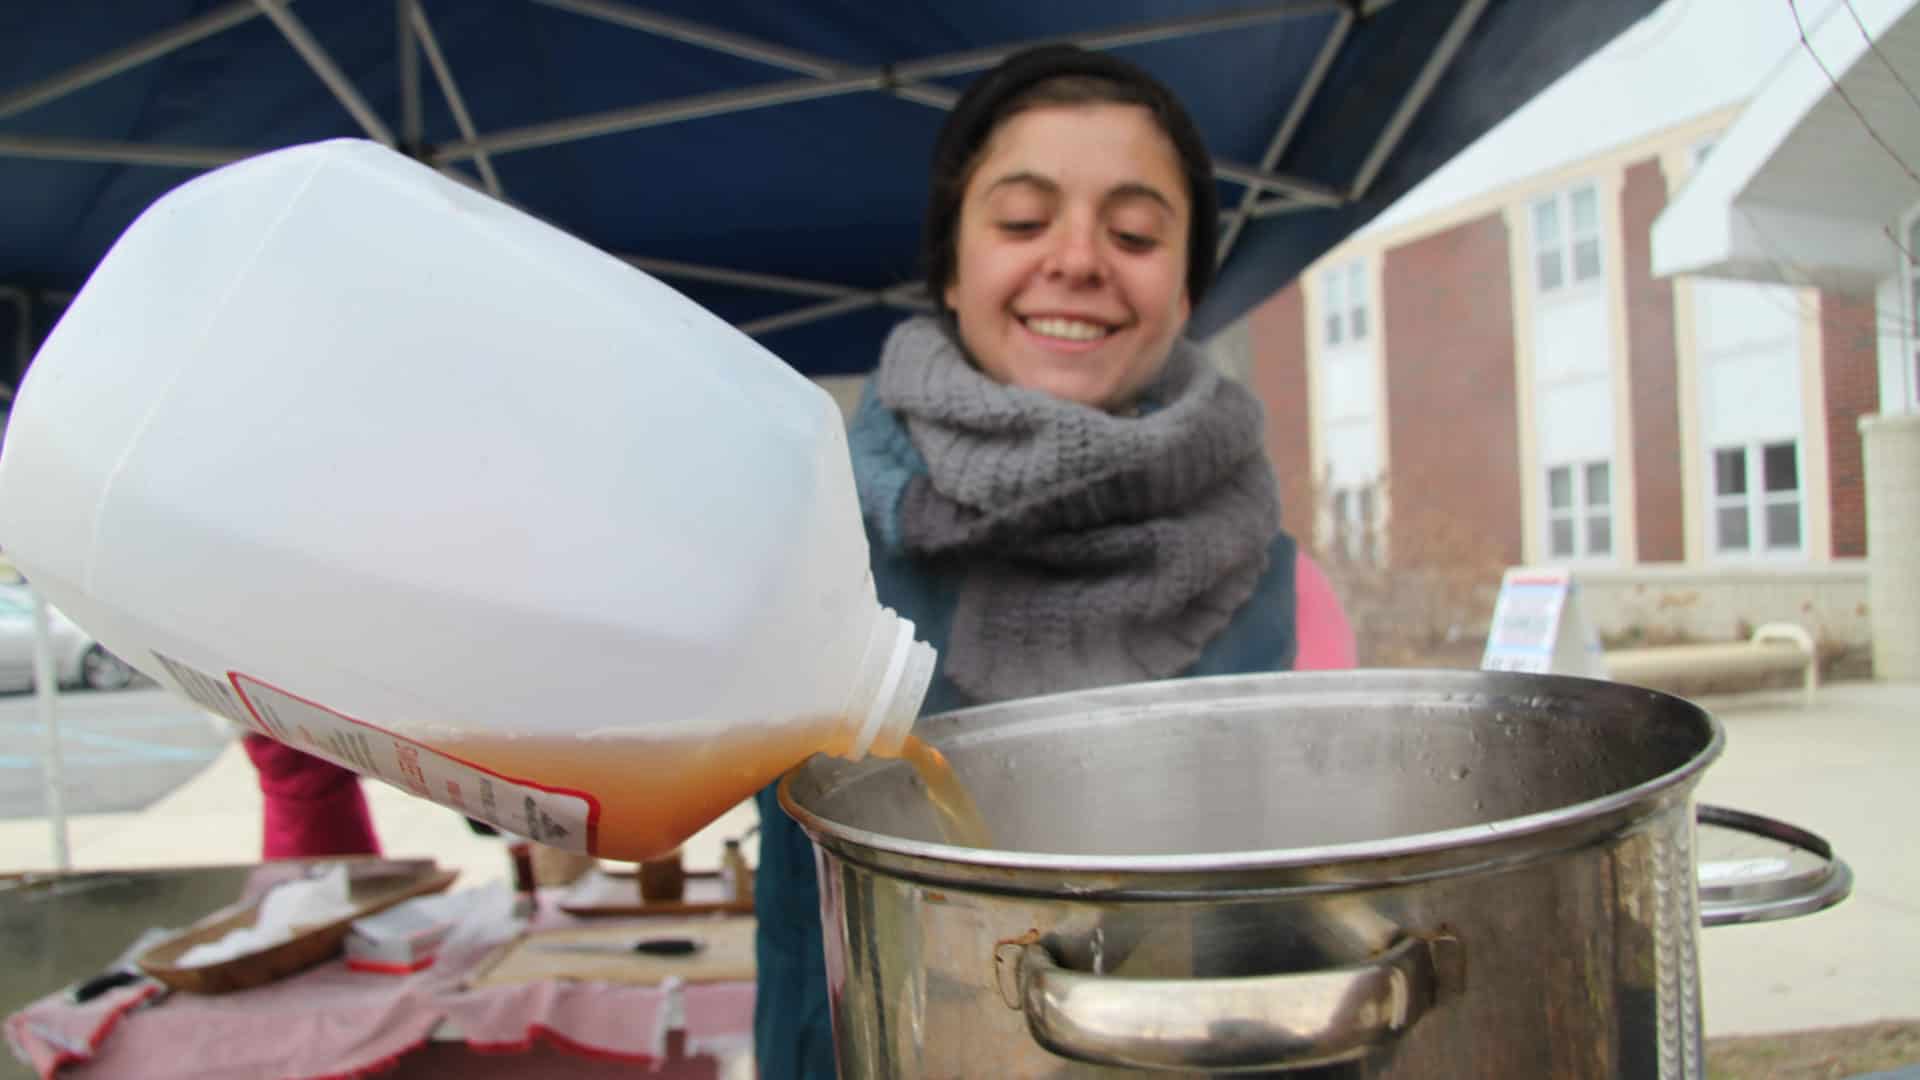 Local makers top up the hot cider mulling outside a Berkshire Grown indoor winter farmers market.